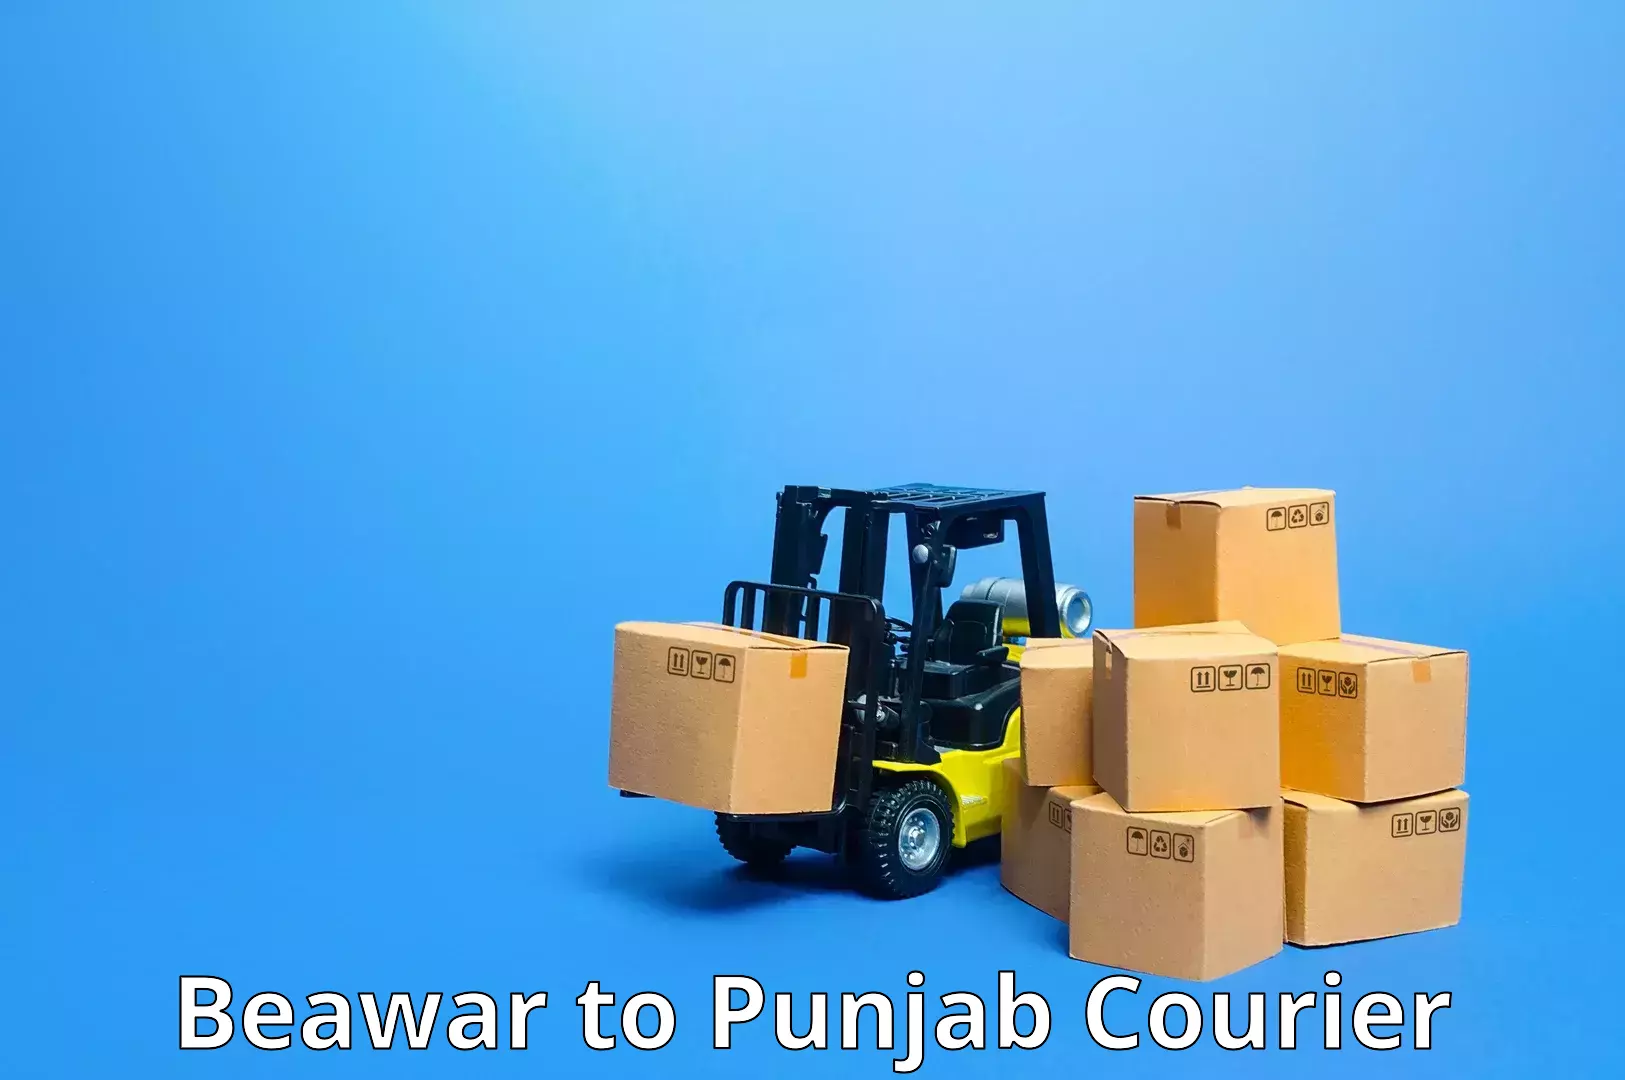 Corporate courier solutions Beawar to Talwara